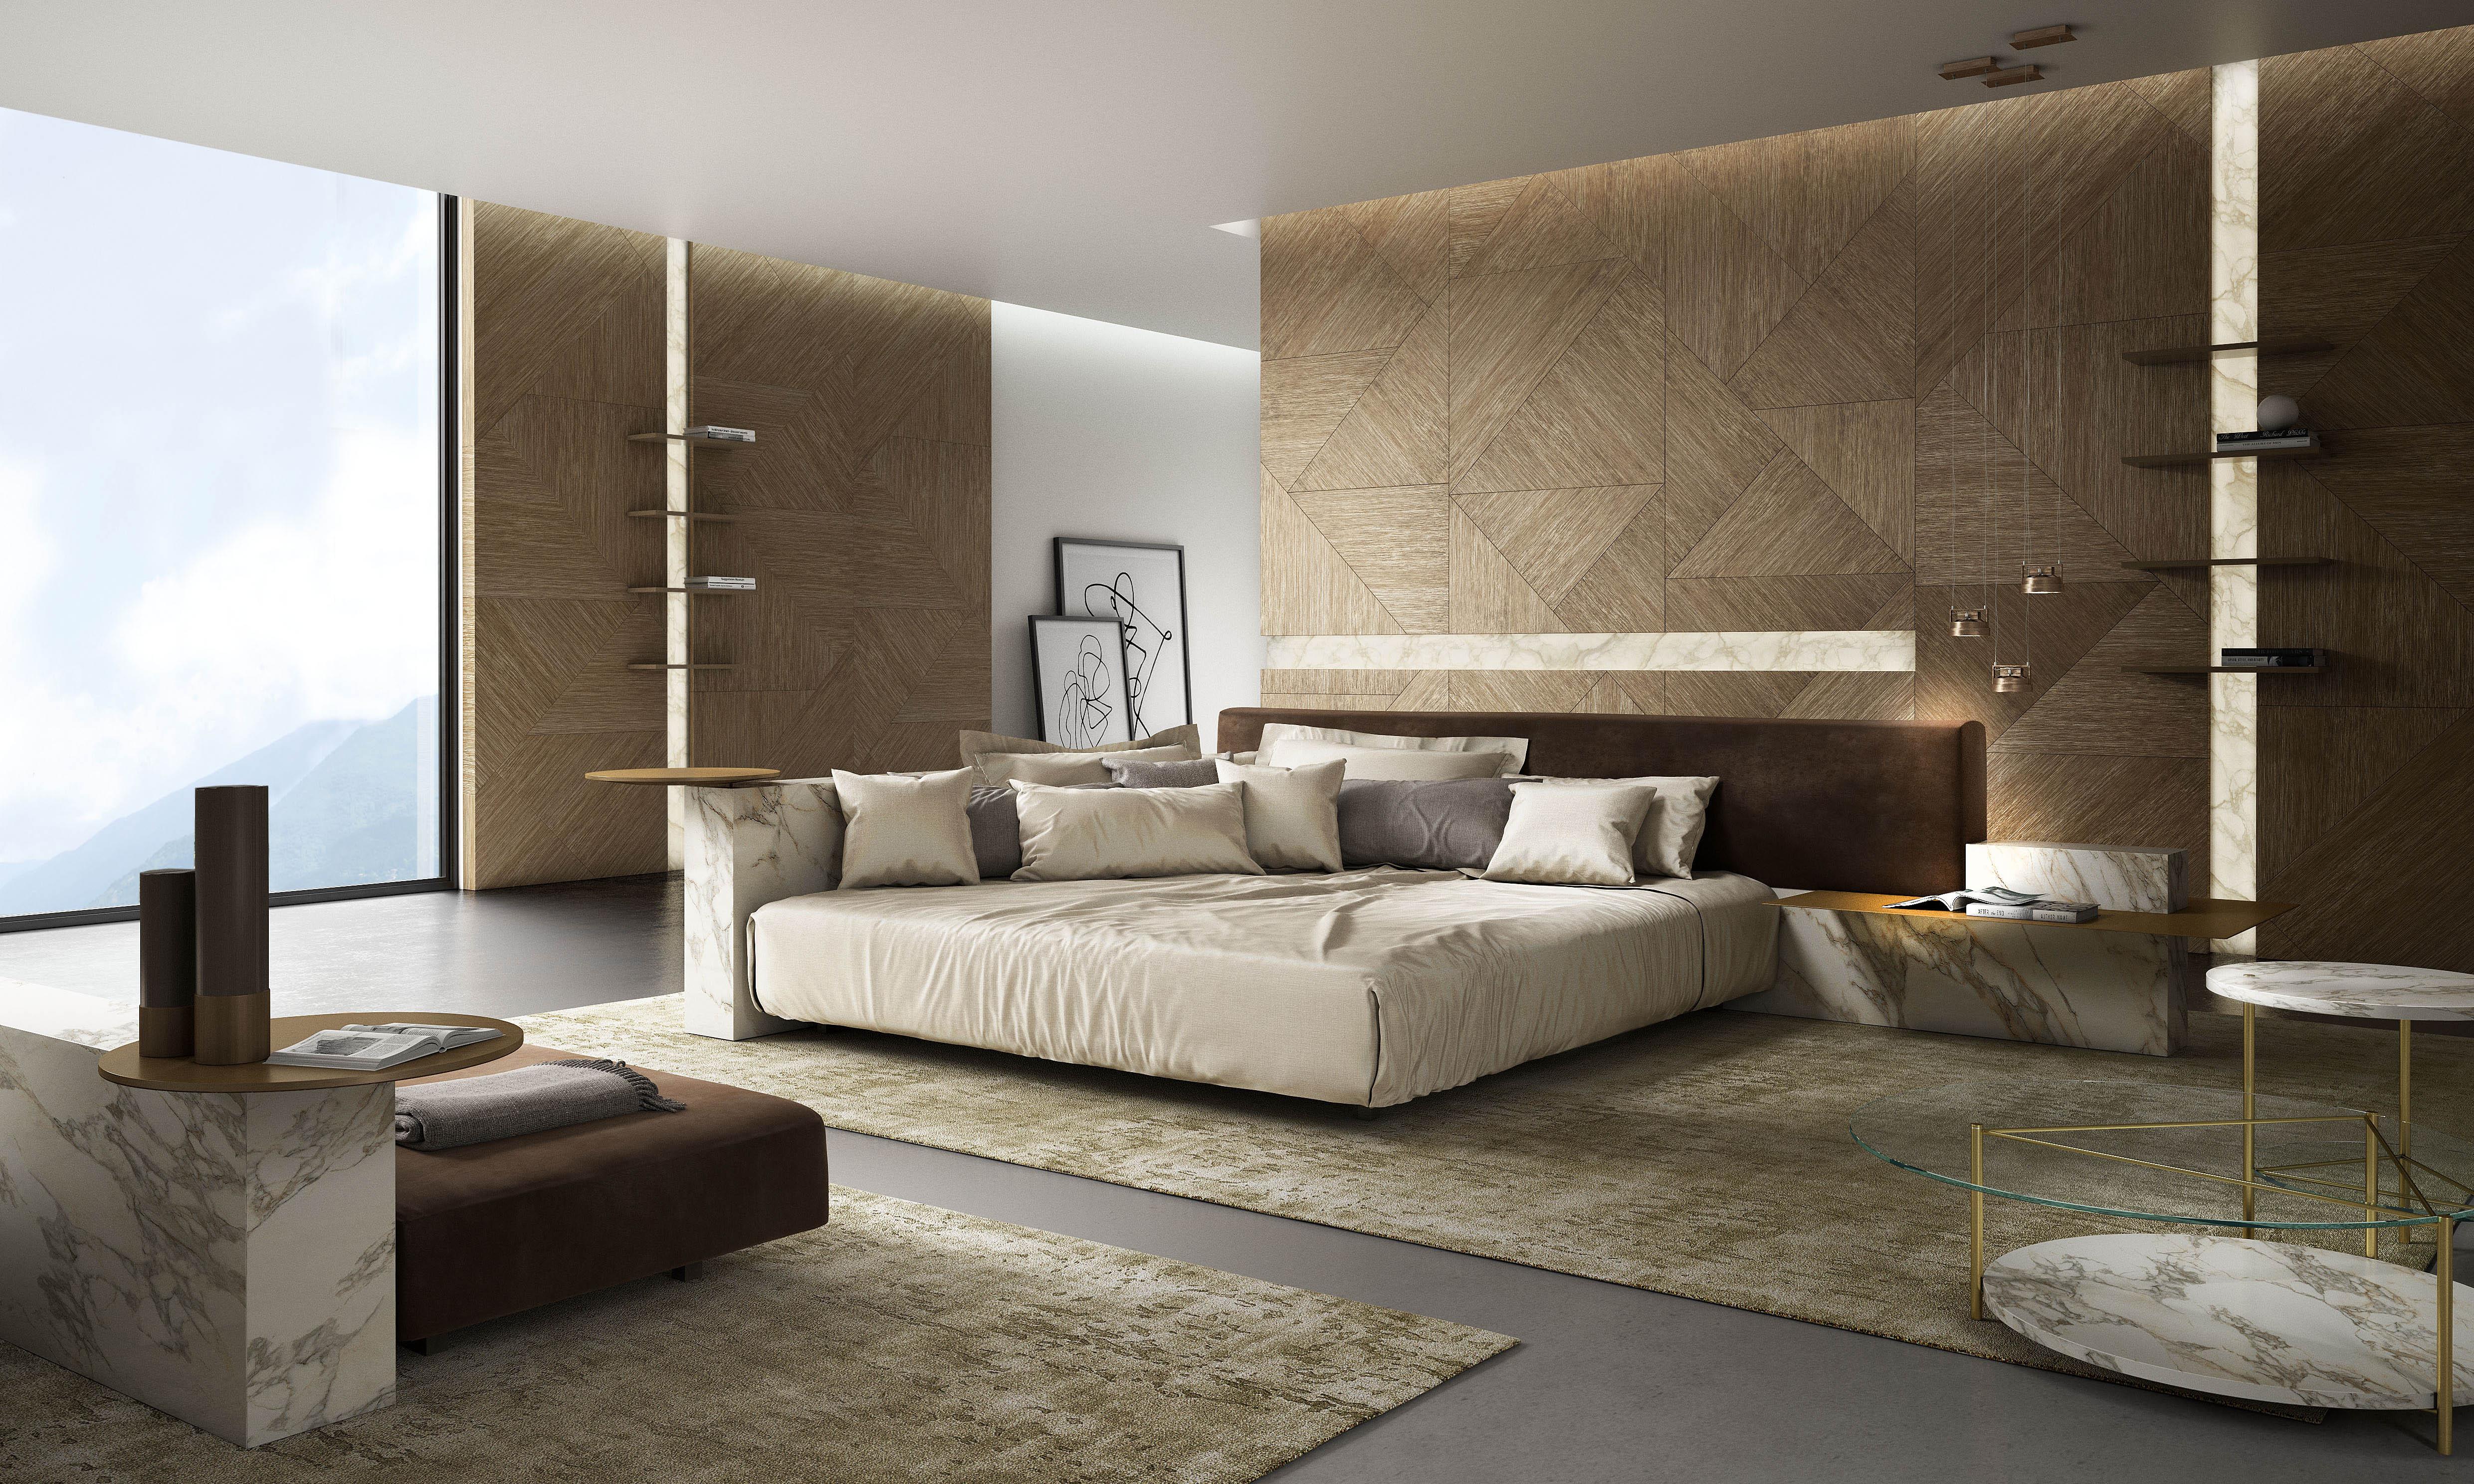 Laurameroni luxury modern integrated wall panels for a bespoke artisanal interior design and decor